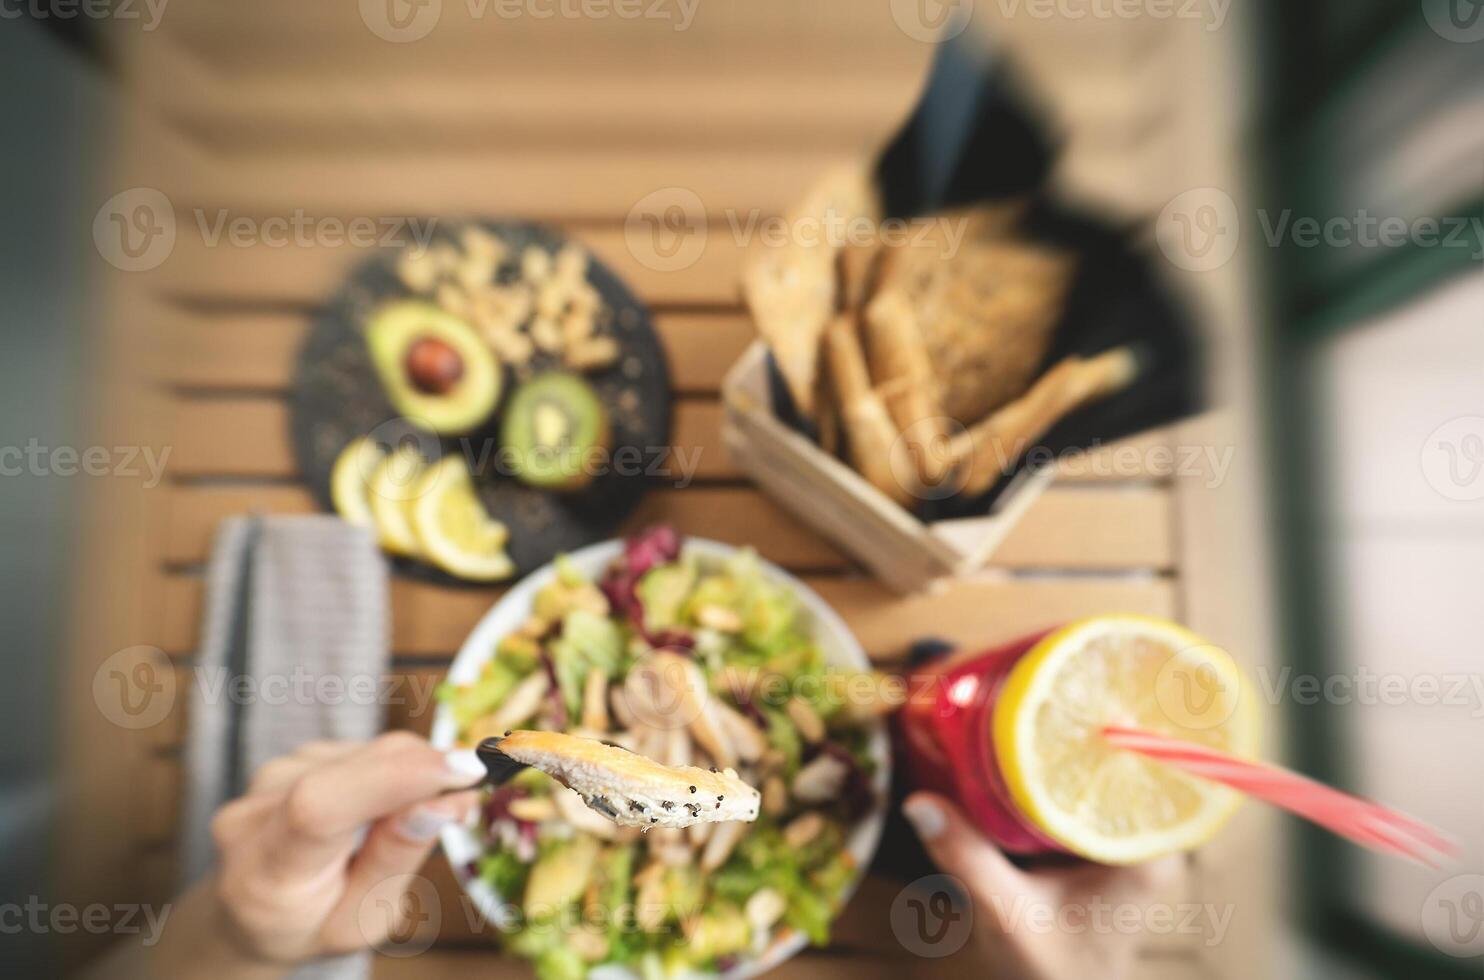 Top view female hands eating health vegetable salad with chicken breast avocado and kiwi drinking fresh smoothie fruit - Healthy nutrition food lifestyle people concept photo